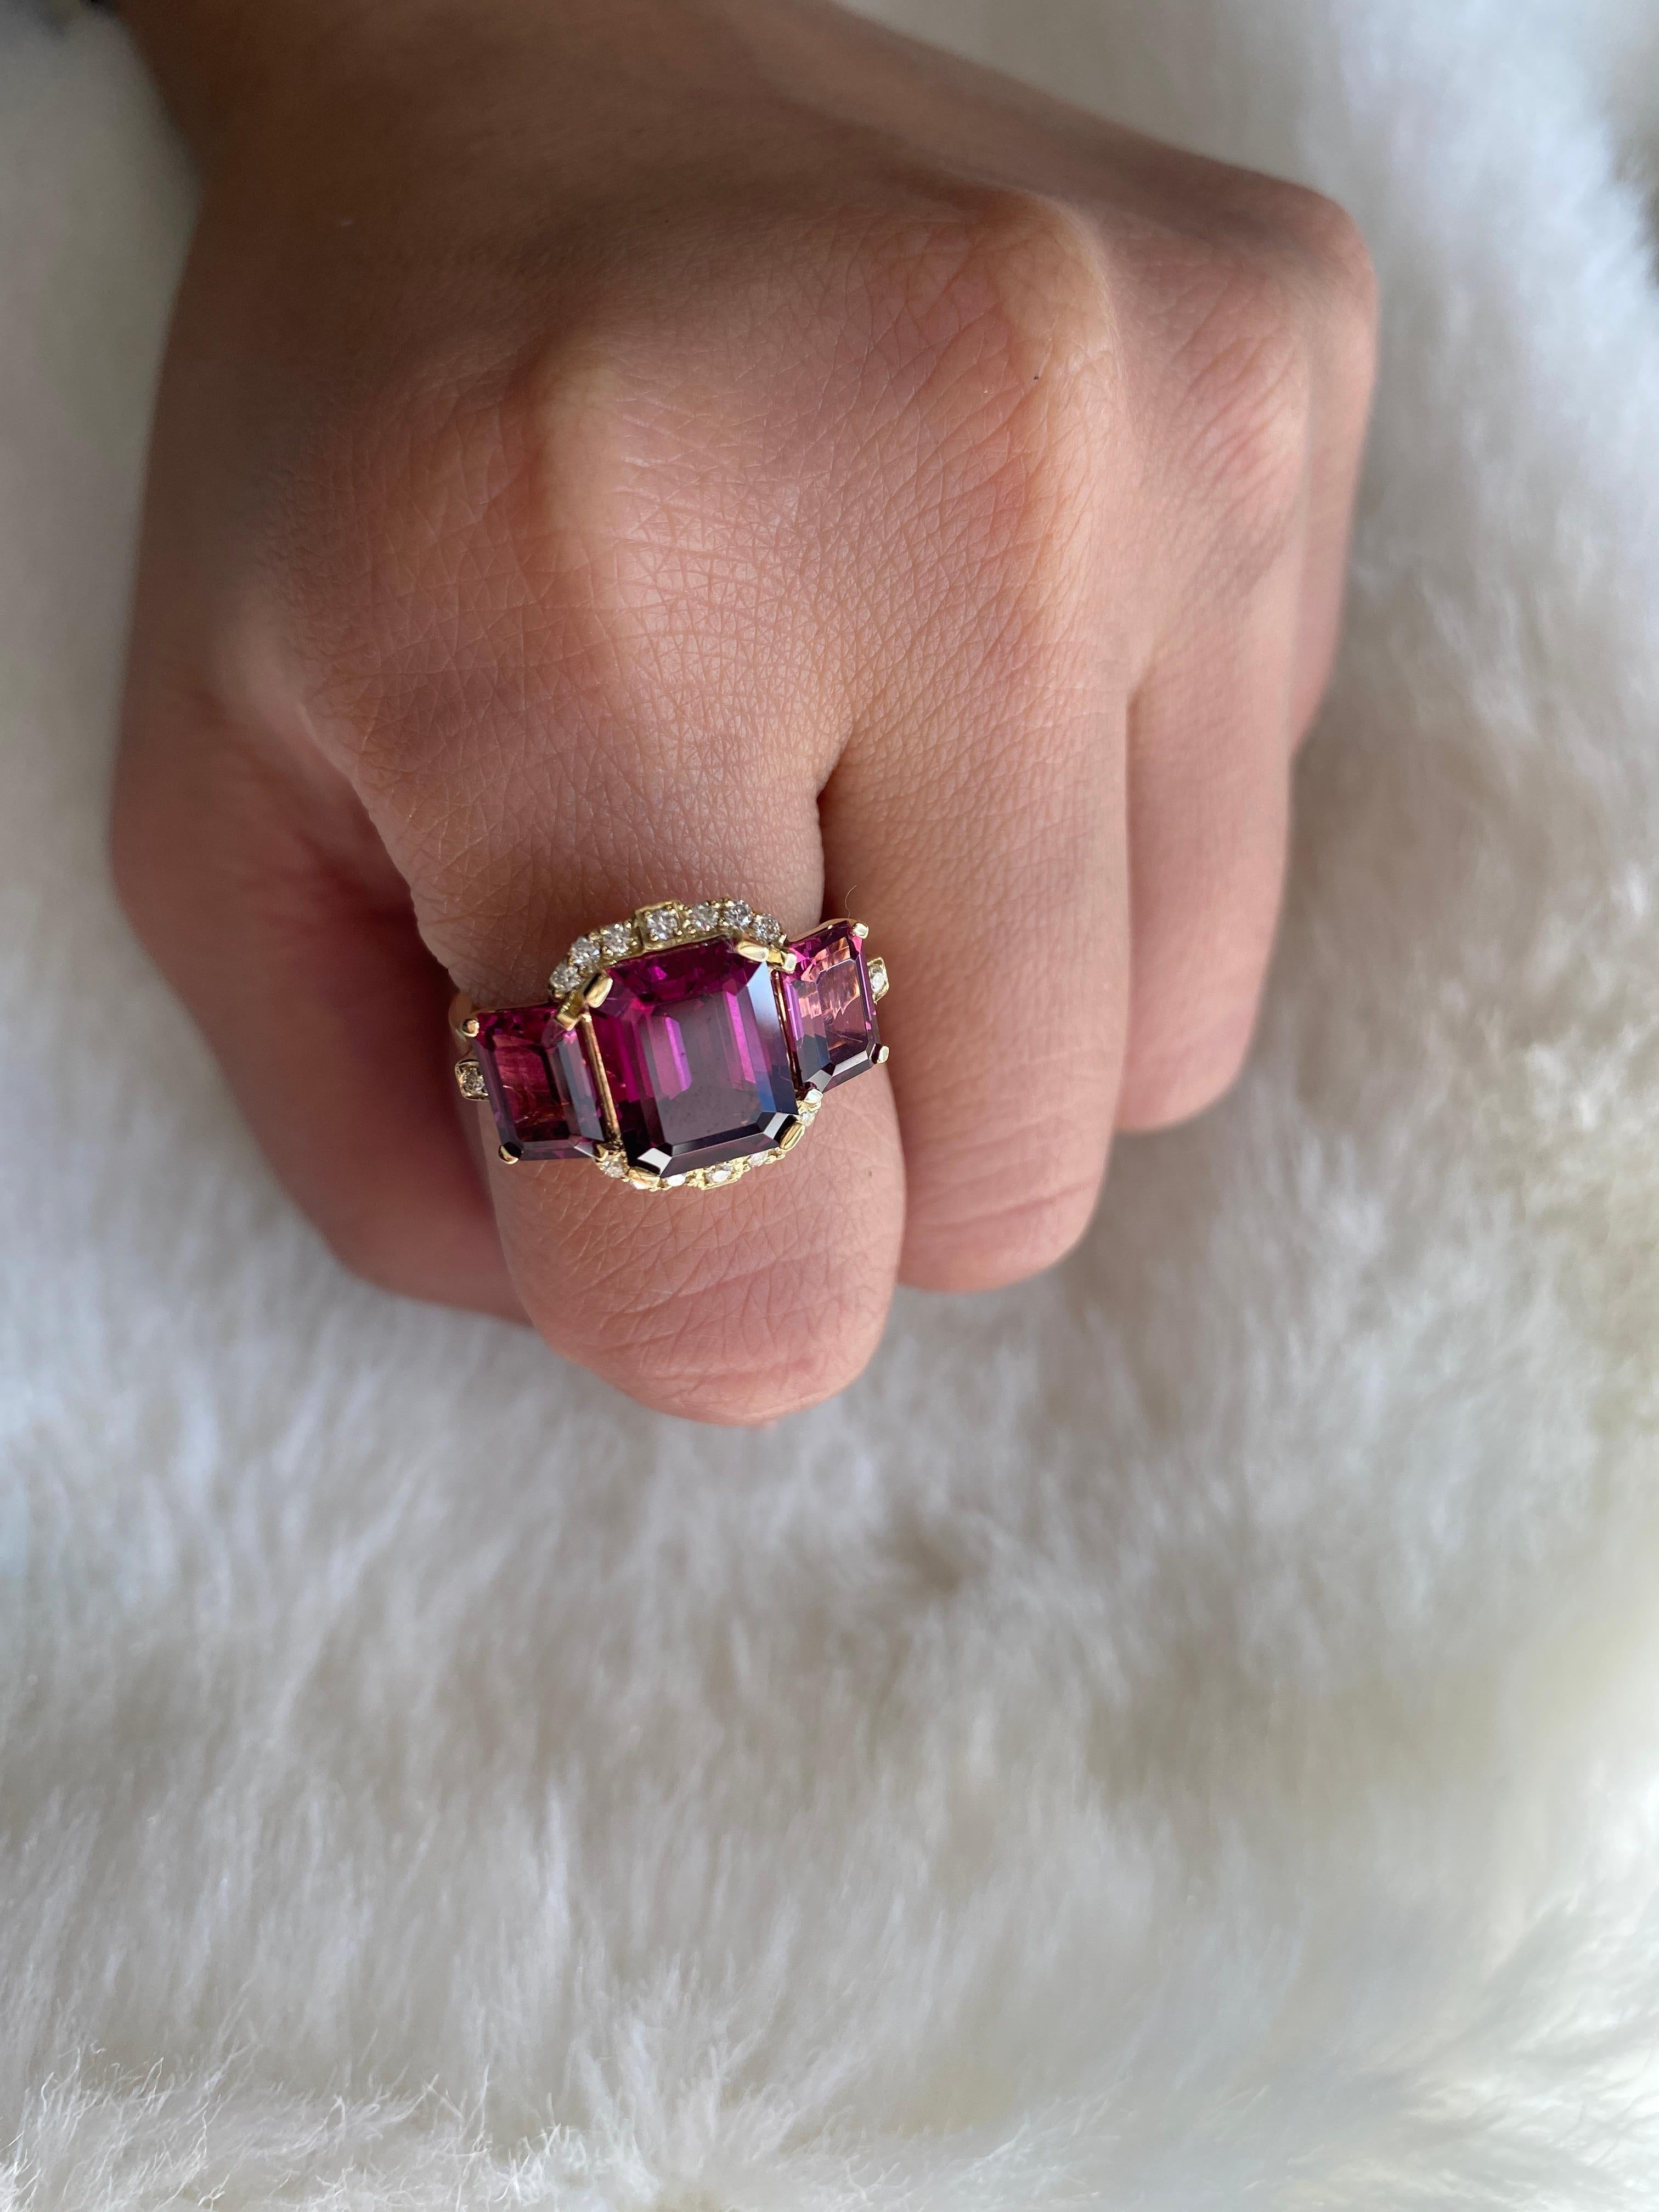 Garnet 3 Stone Emerald Cut Ring with Diamonds set in 18K Yellow Gold. From our popular 'Gossip' Collection, this piece carries a hint of shock value.

* Stone Size: 10 x 8 - 7 x 5 mm
* Gemstone: 100% Earth Mined 
* Approx. gemstone Weight: 5.81